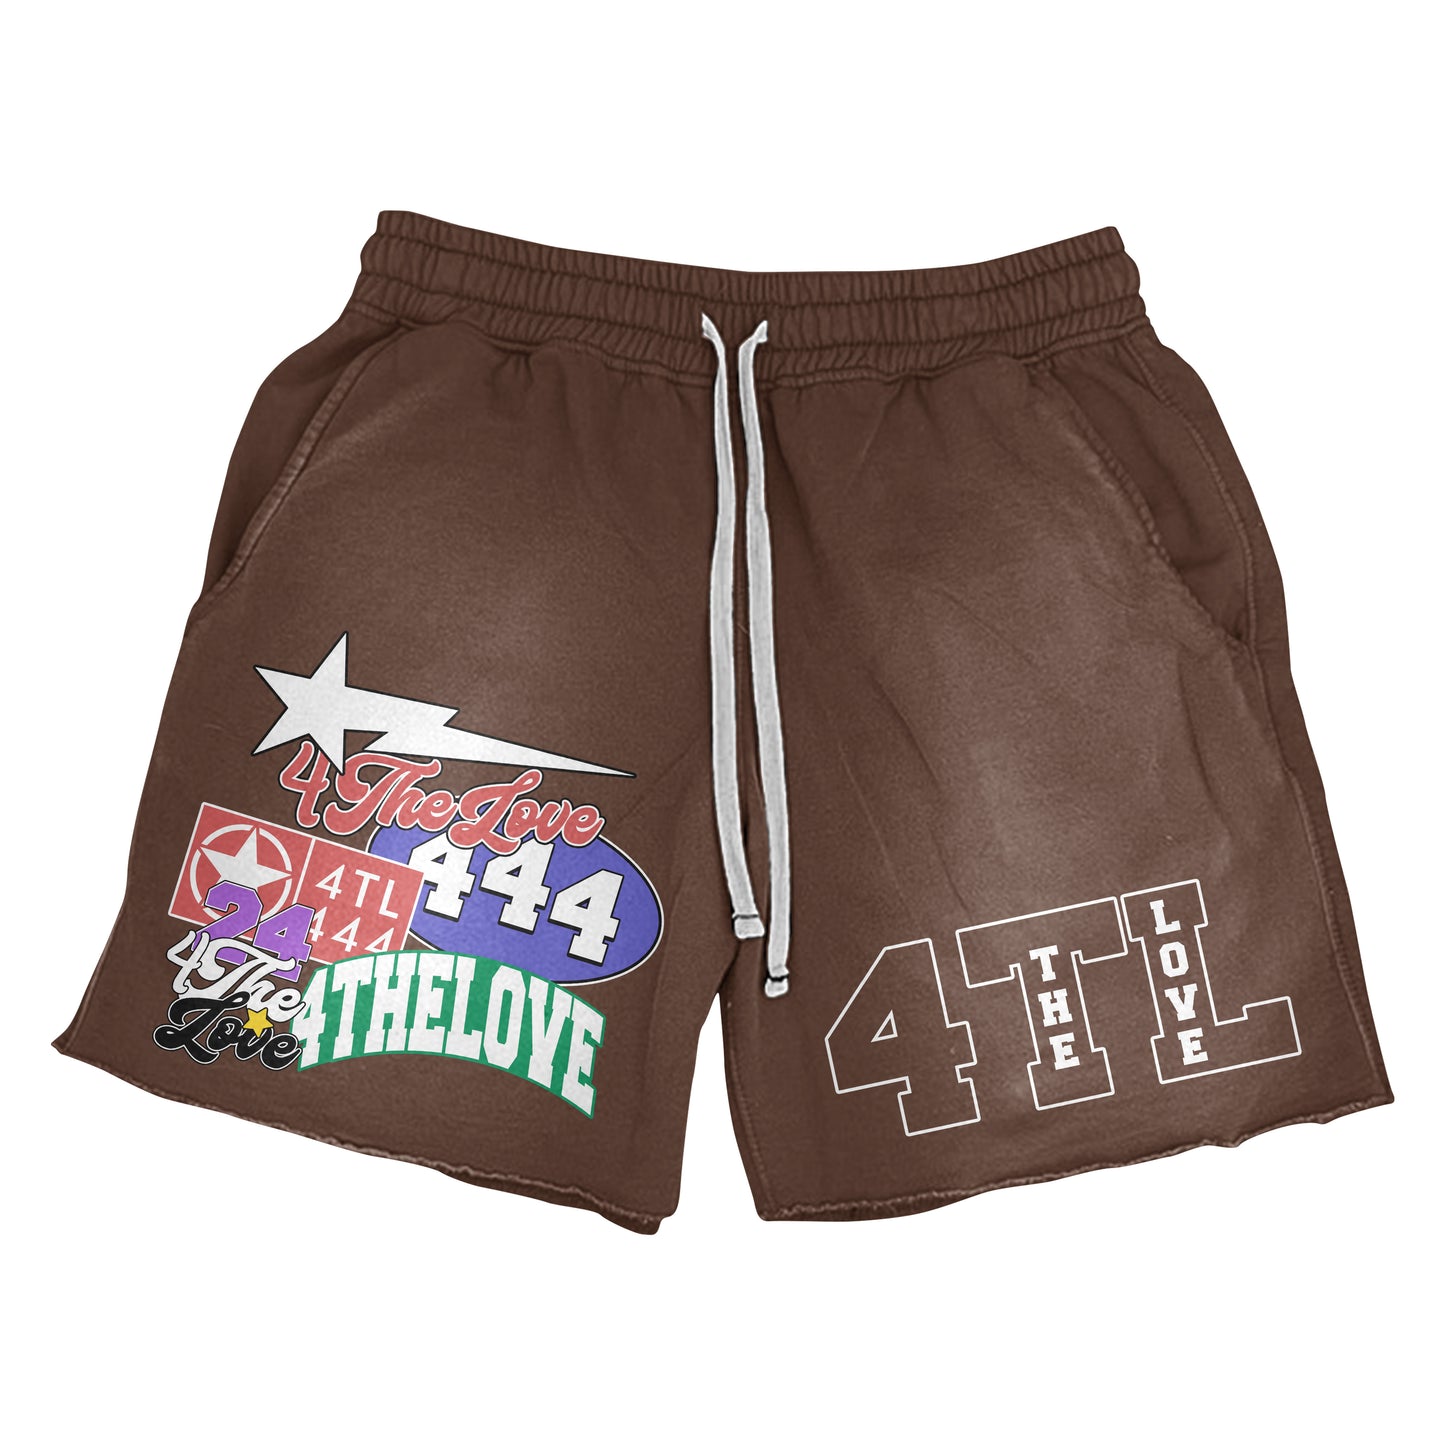 Summer pack shorts (brown)